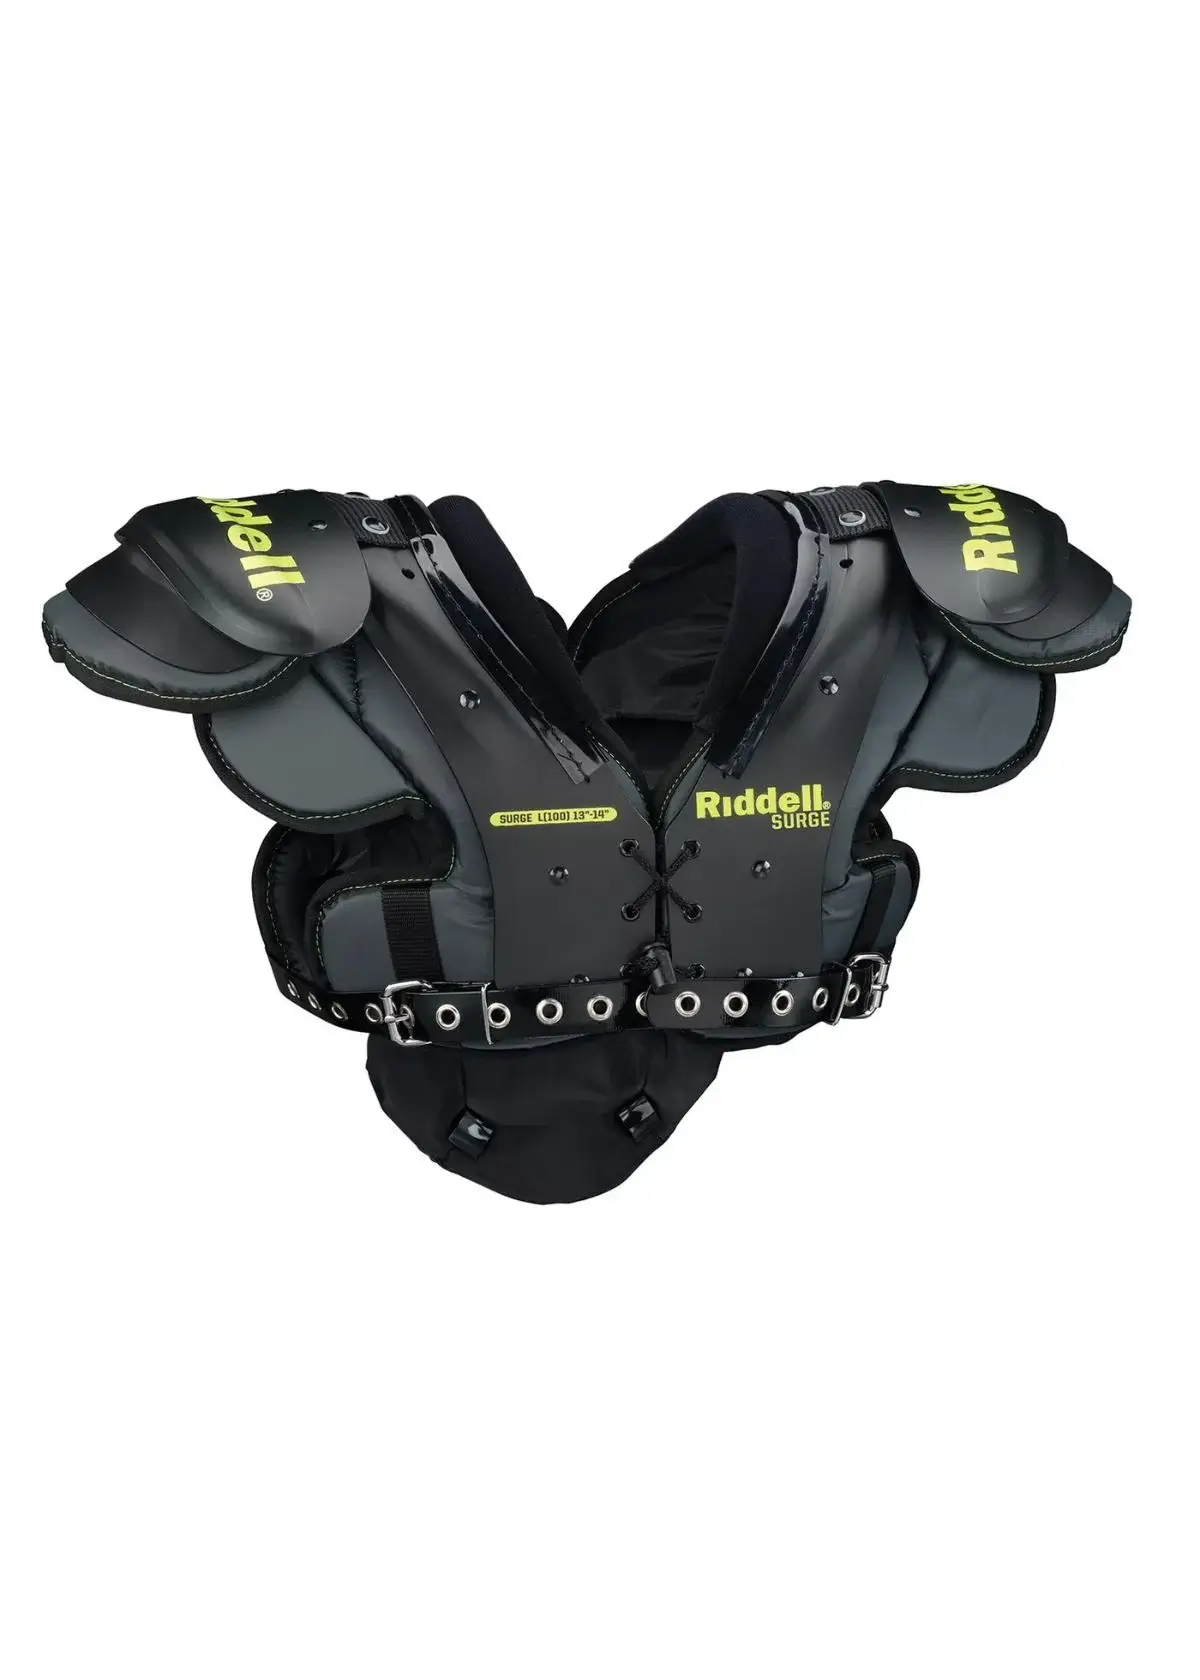 How to choose the right football shoulder pads?